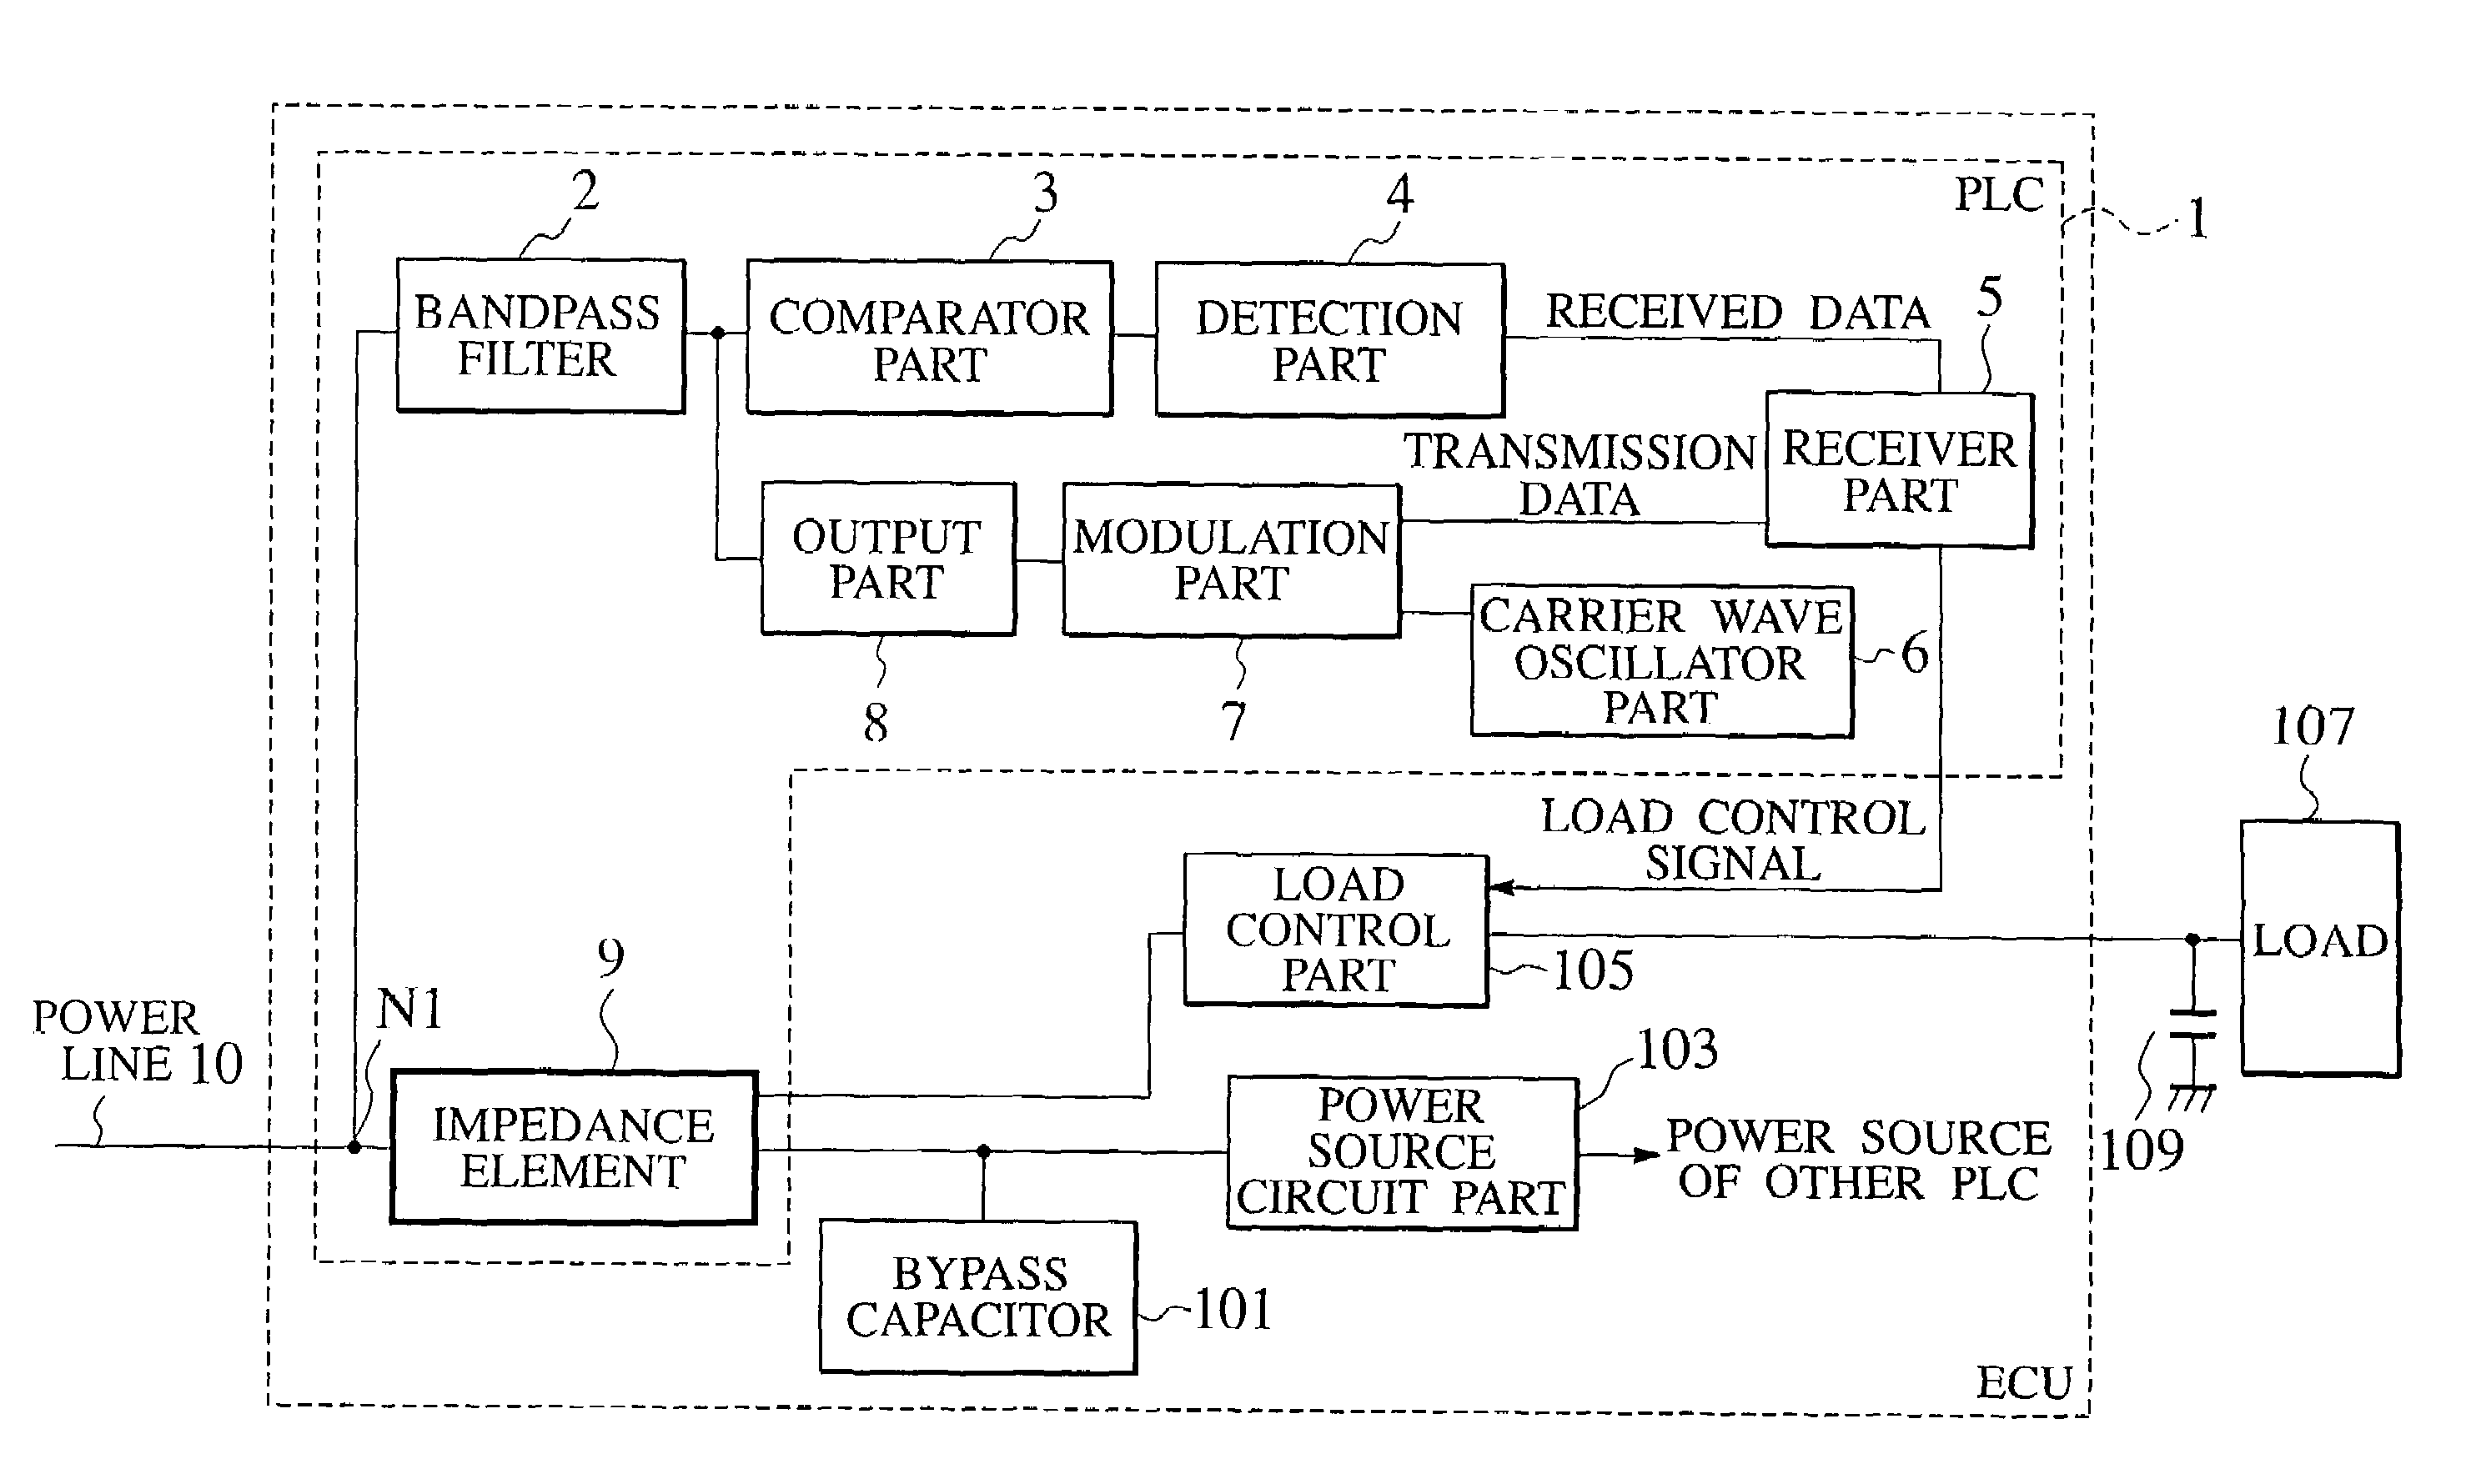 Power line communication device for vehicle